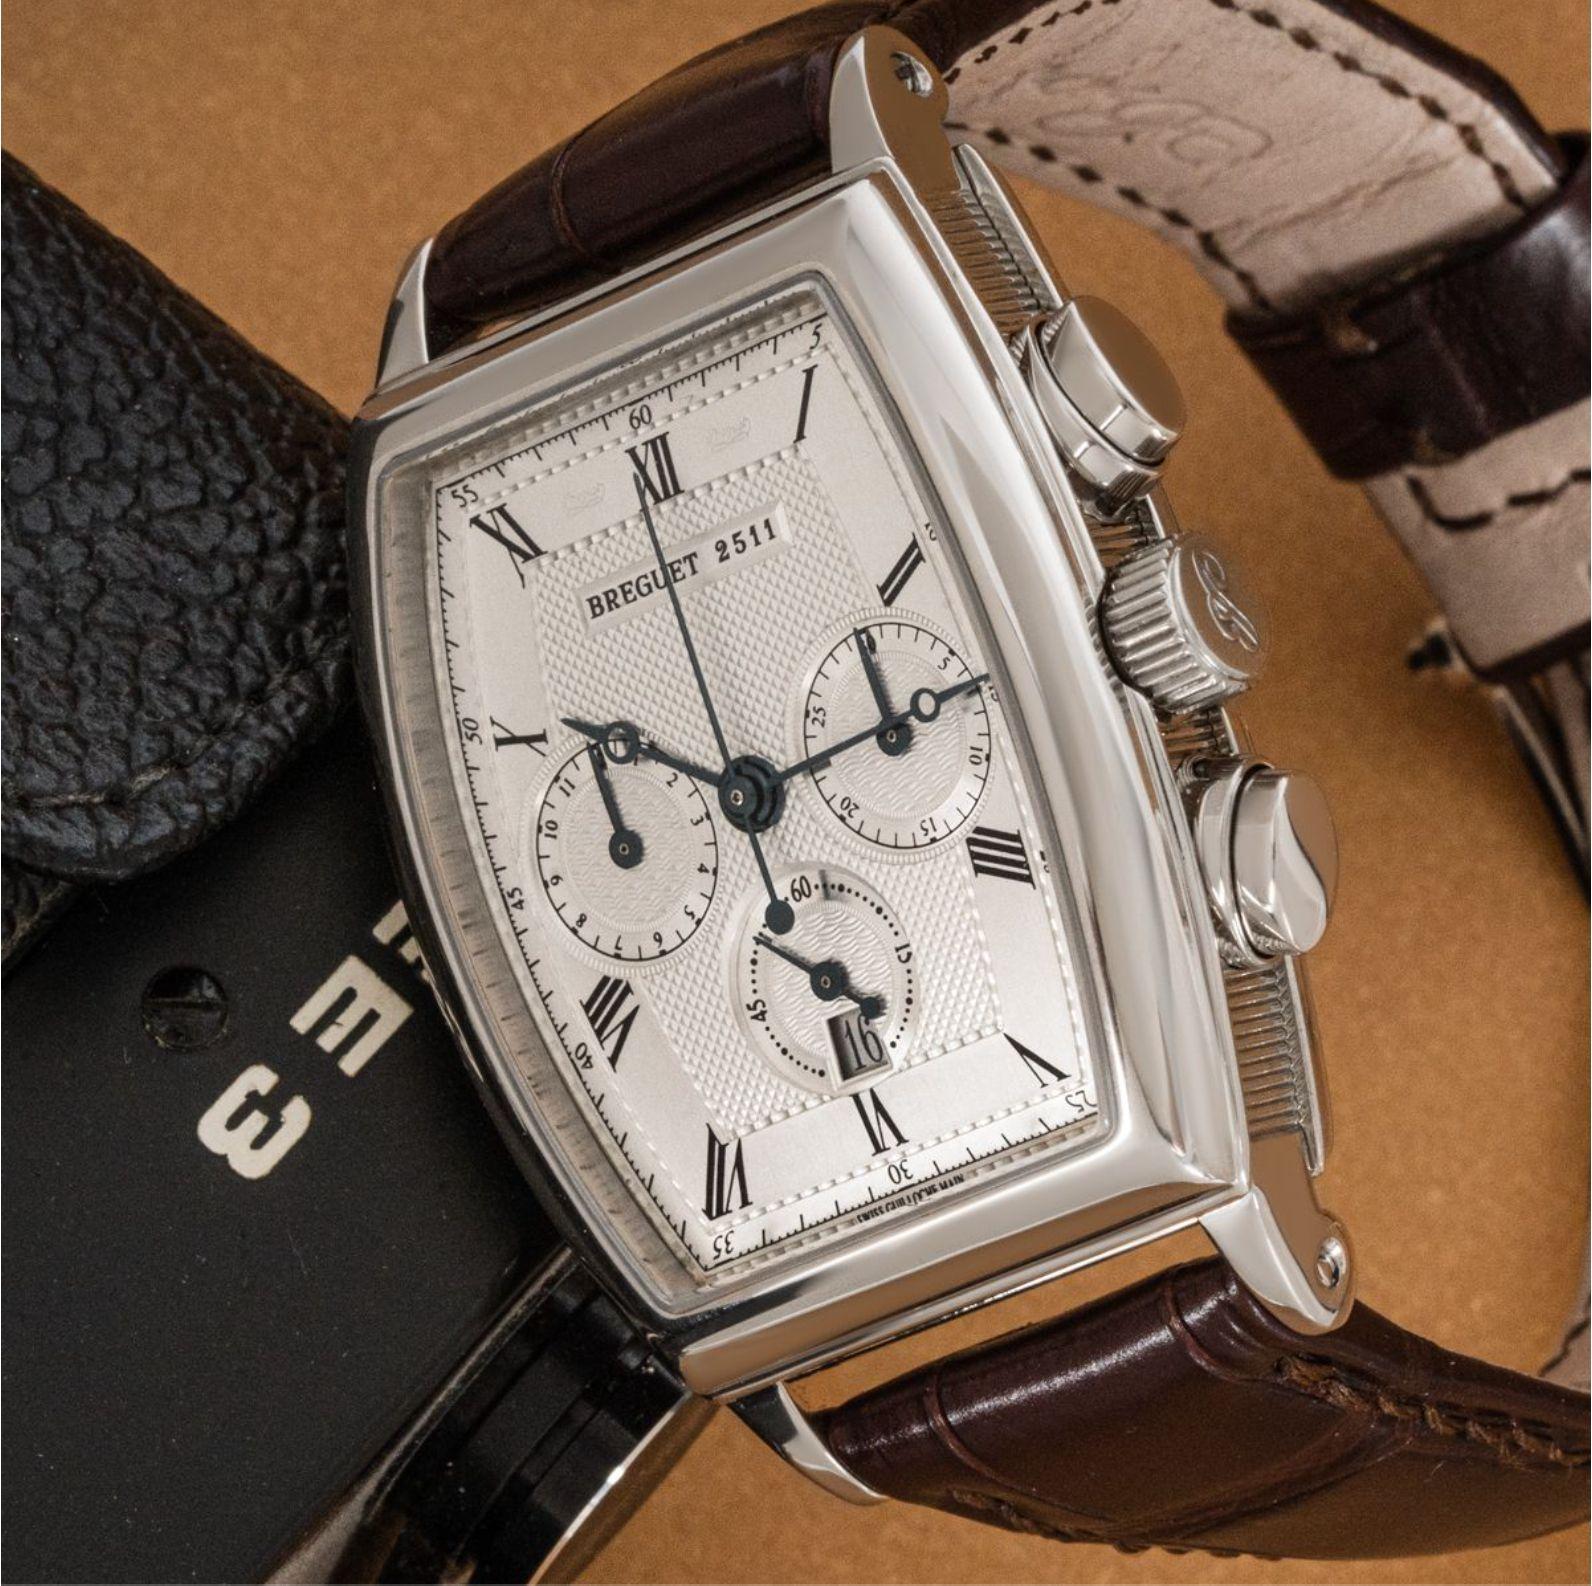 A white gold Breguet chronograph from the Heritage collection. The tonneau shaped case features a silver dial with roman numerals, blue steel moon hands, 3 chronograph counters and a white gold bezel.

Presented on a Breguet brown leather strap and